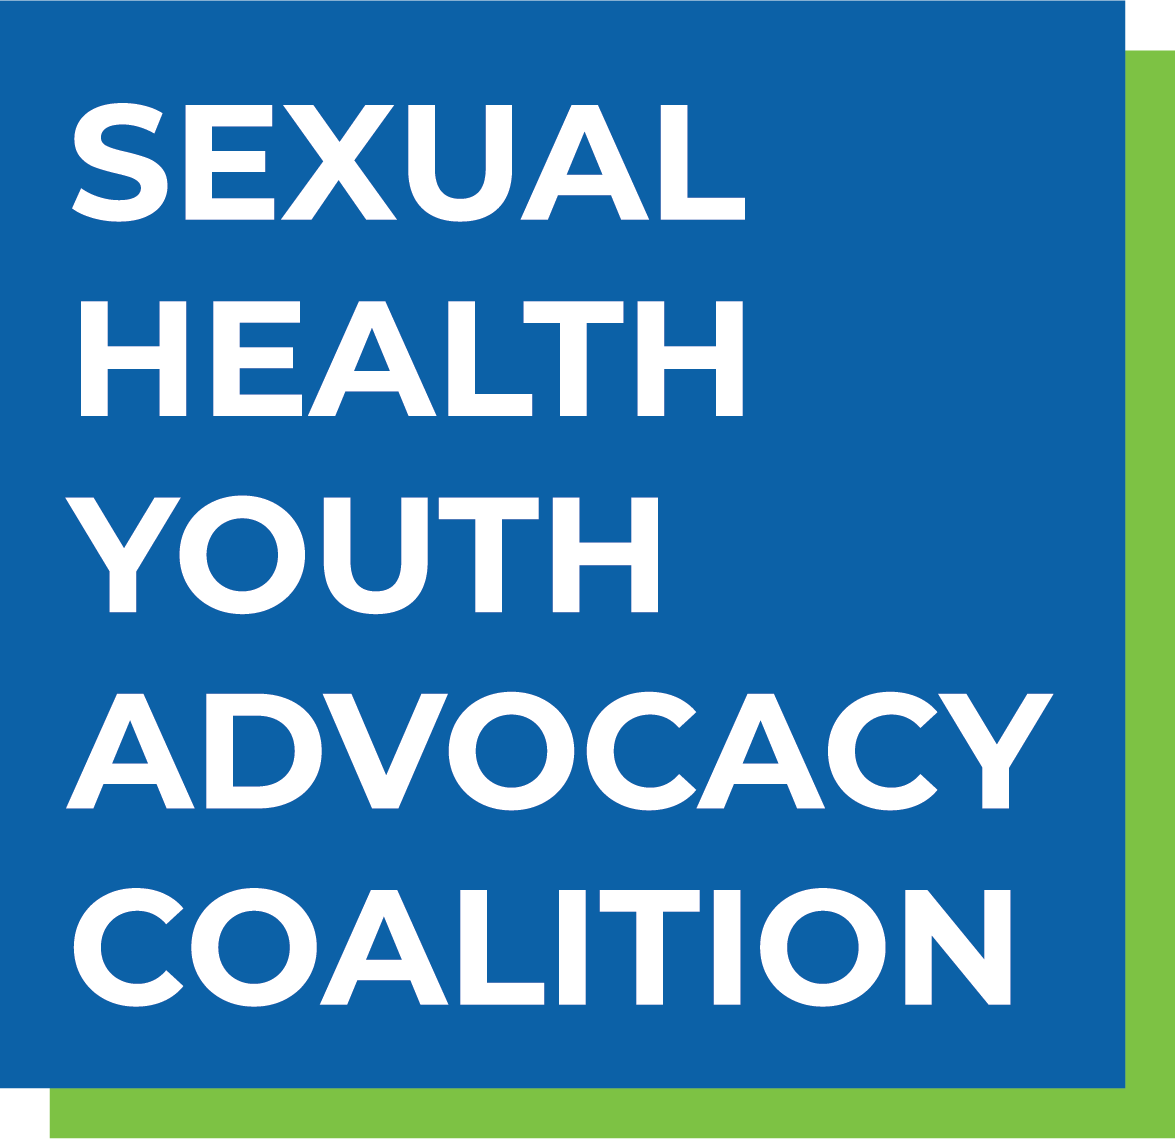 Sexual Health Youth Advocacy Coalition